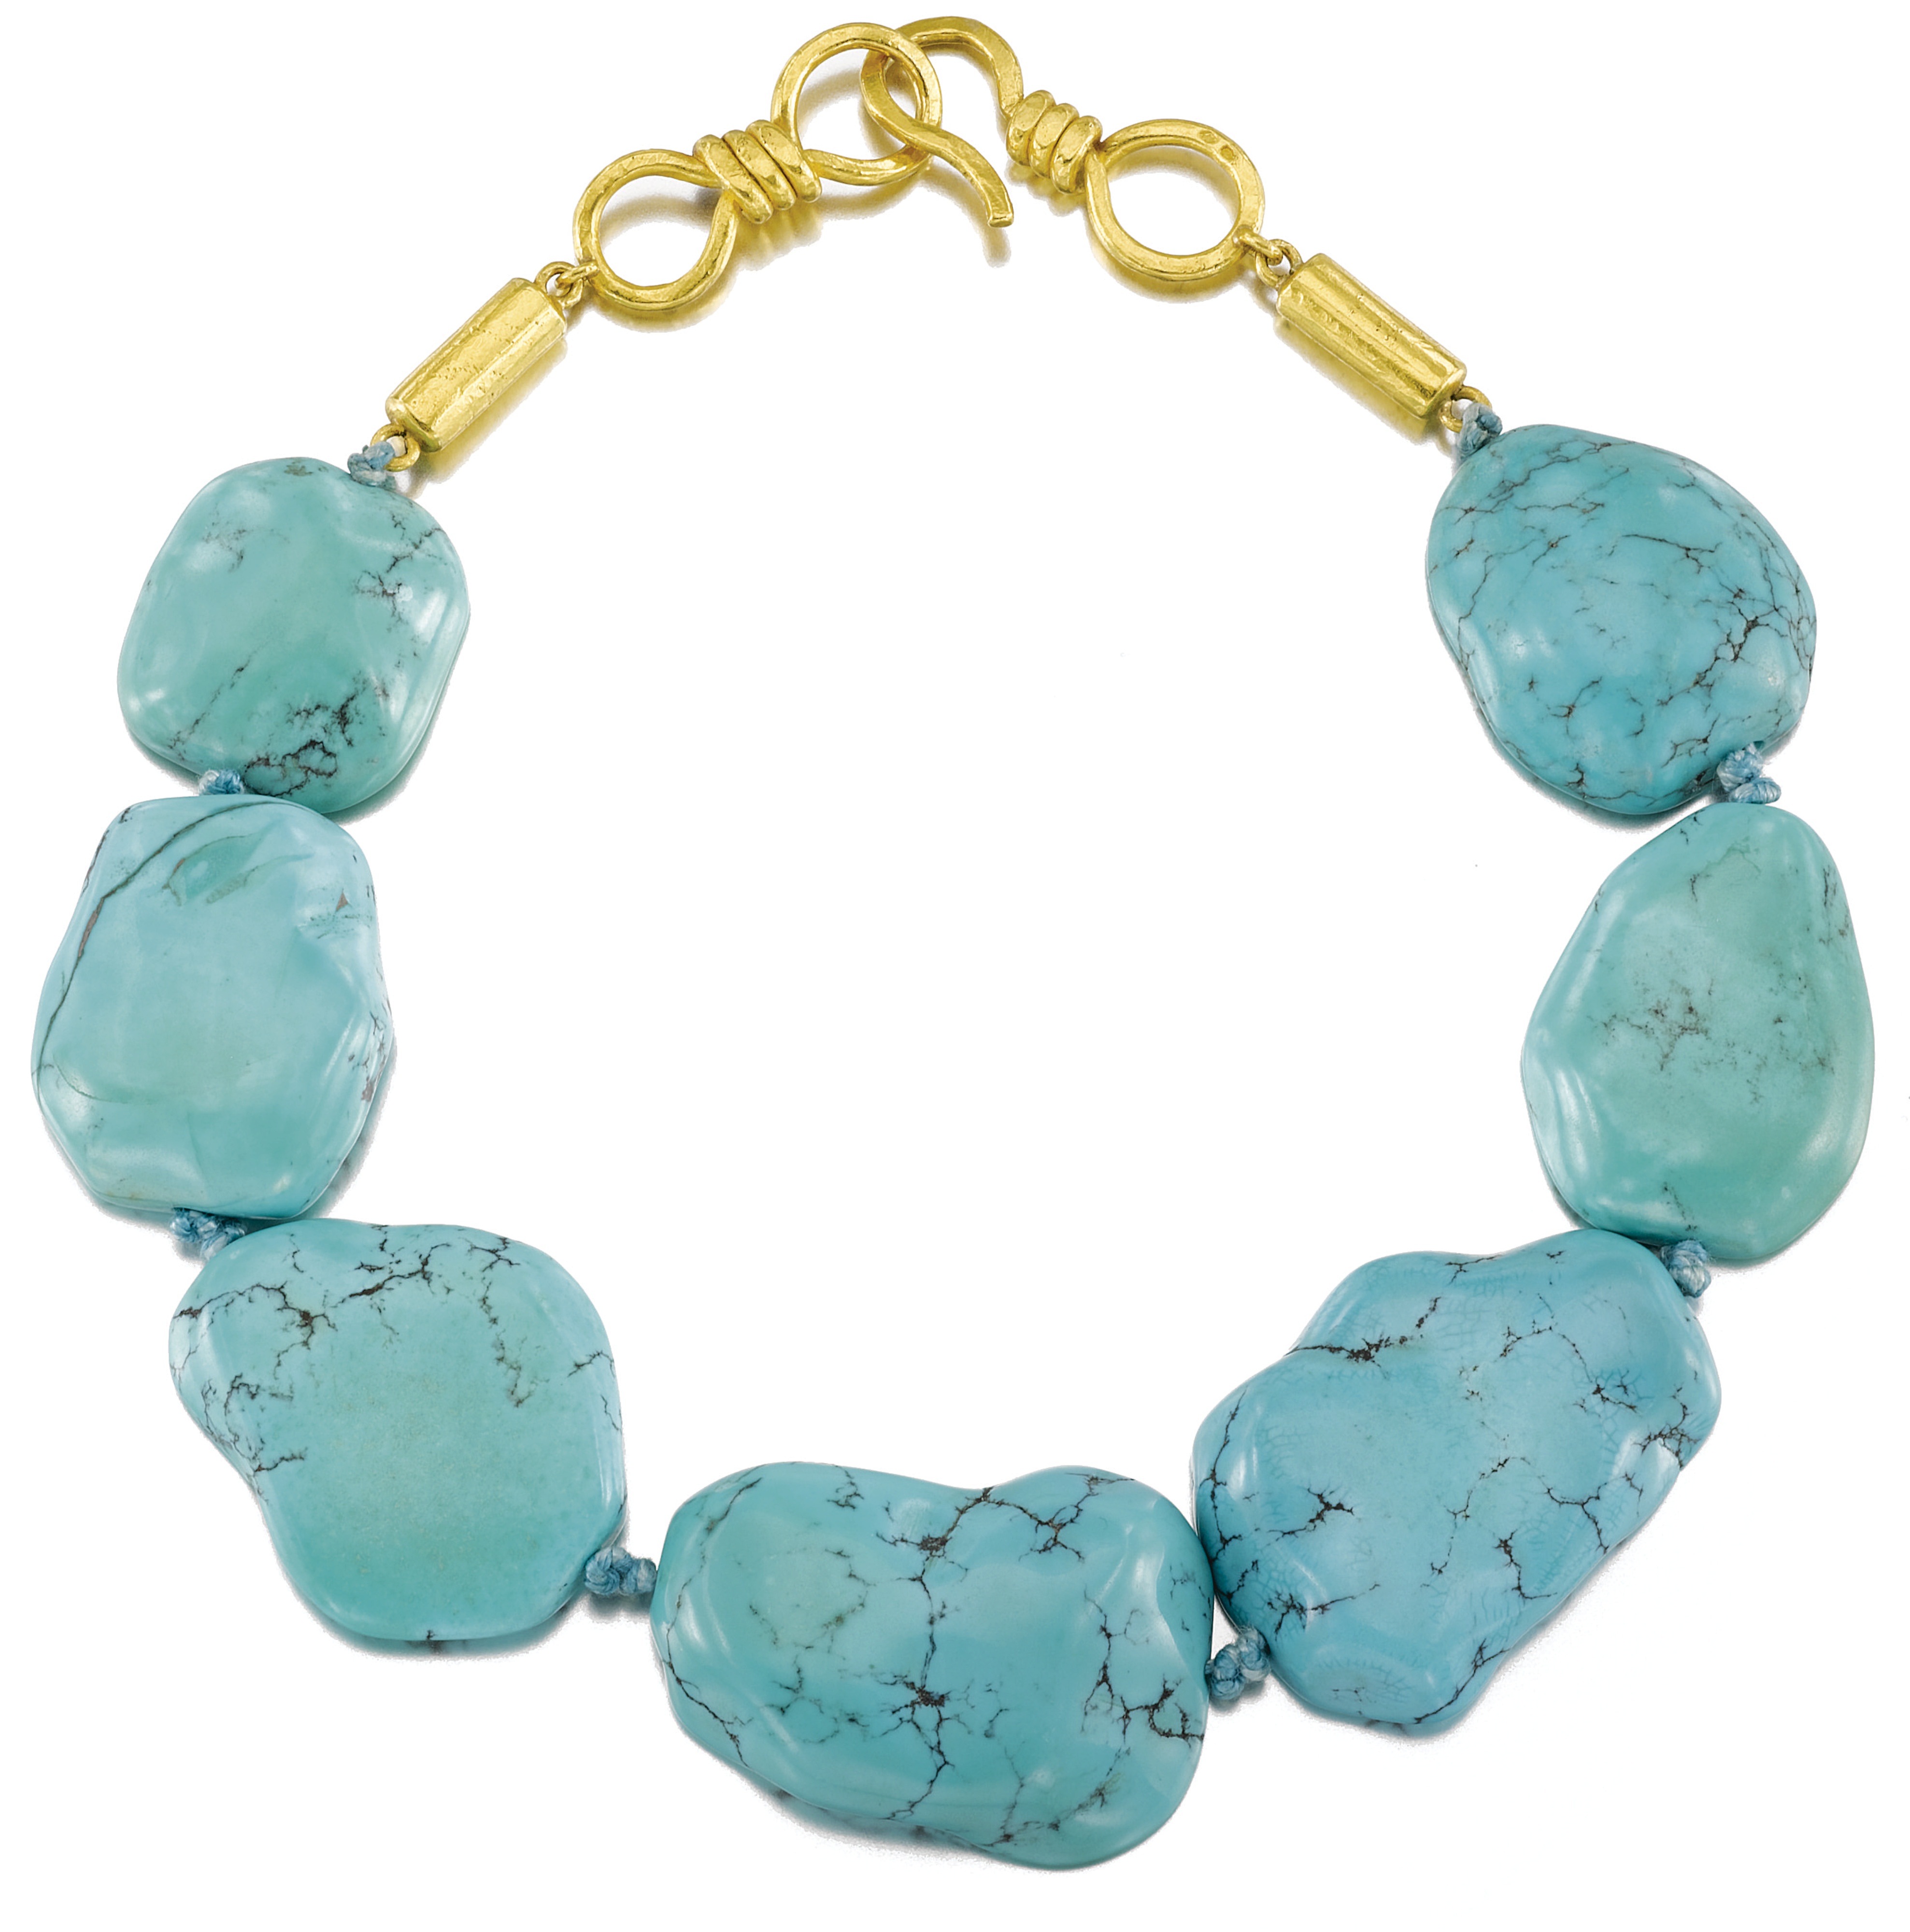 Gold and turquoise necklace, Suzanne Belperron, 1955-1970. Sold for 45000 CHF at Sotheby's in Geneva.